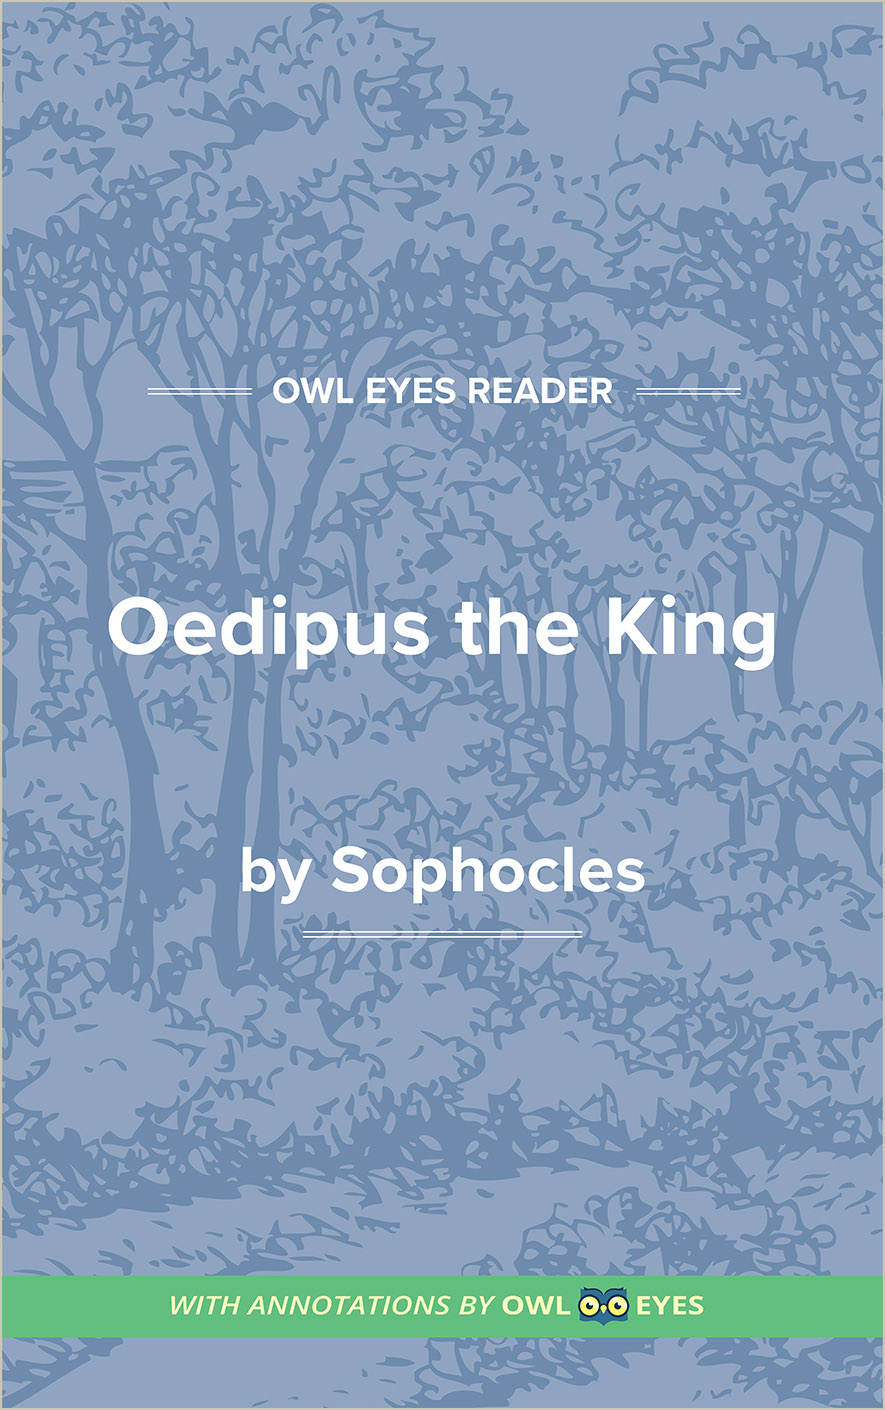 Oedipus The King Character Analysis | www.informationsecuritysummit.org